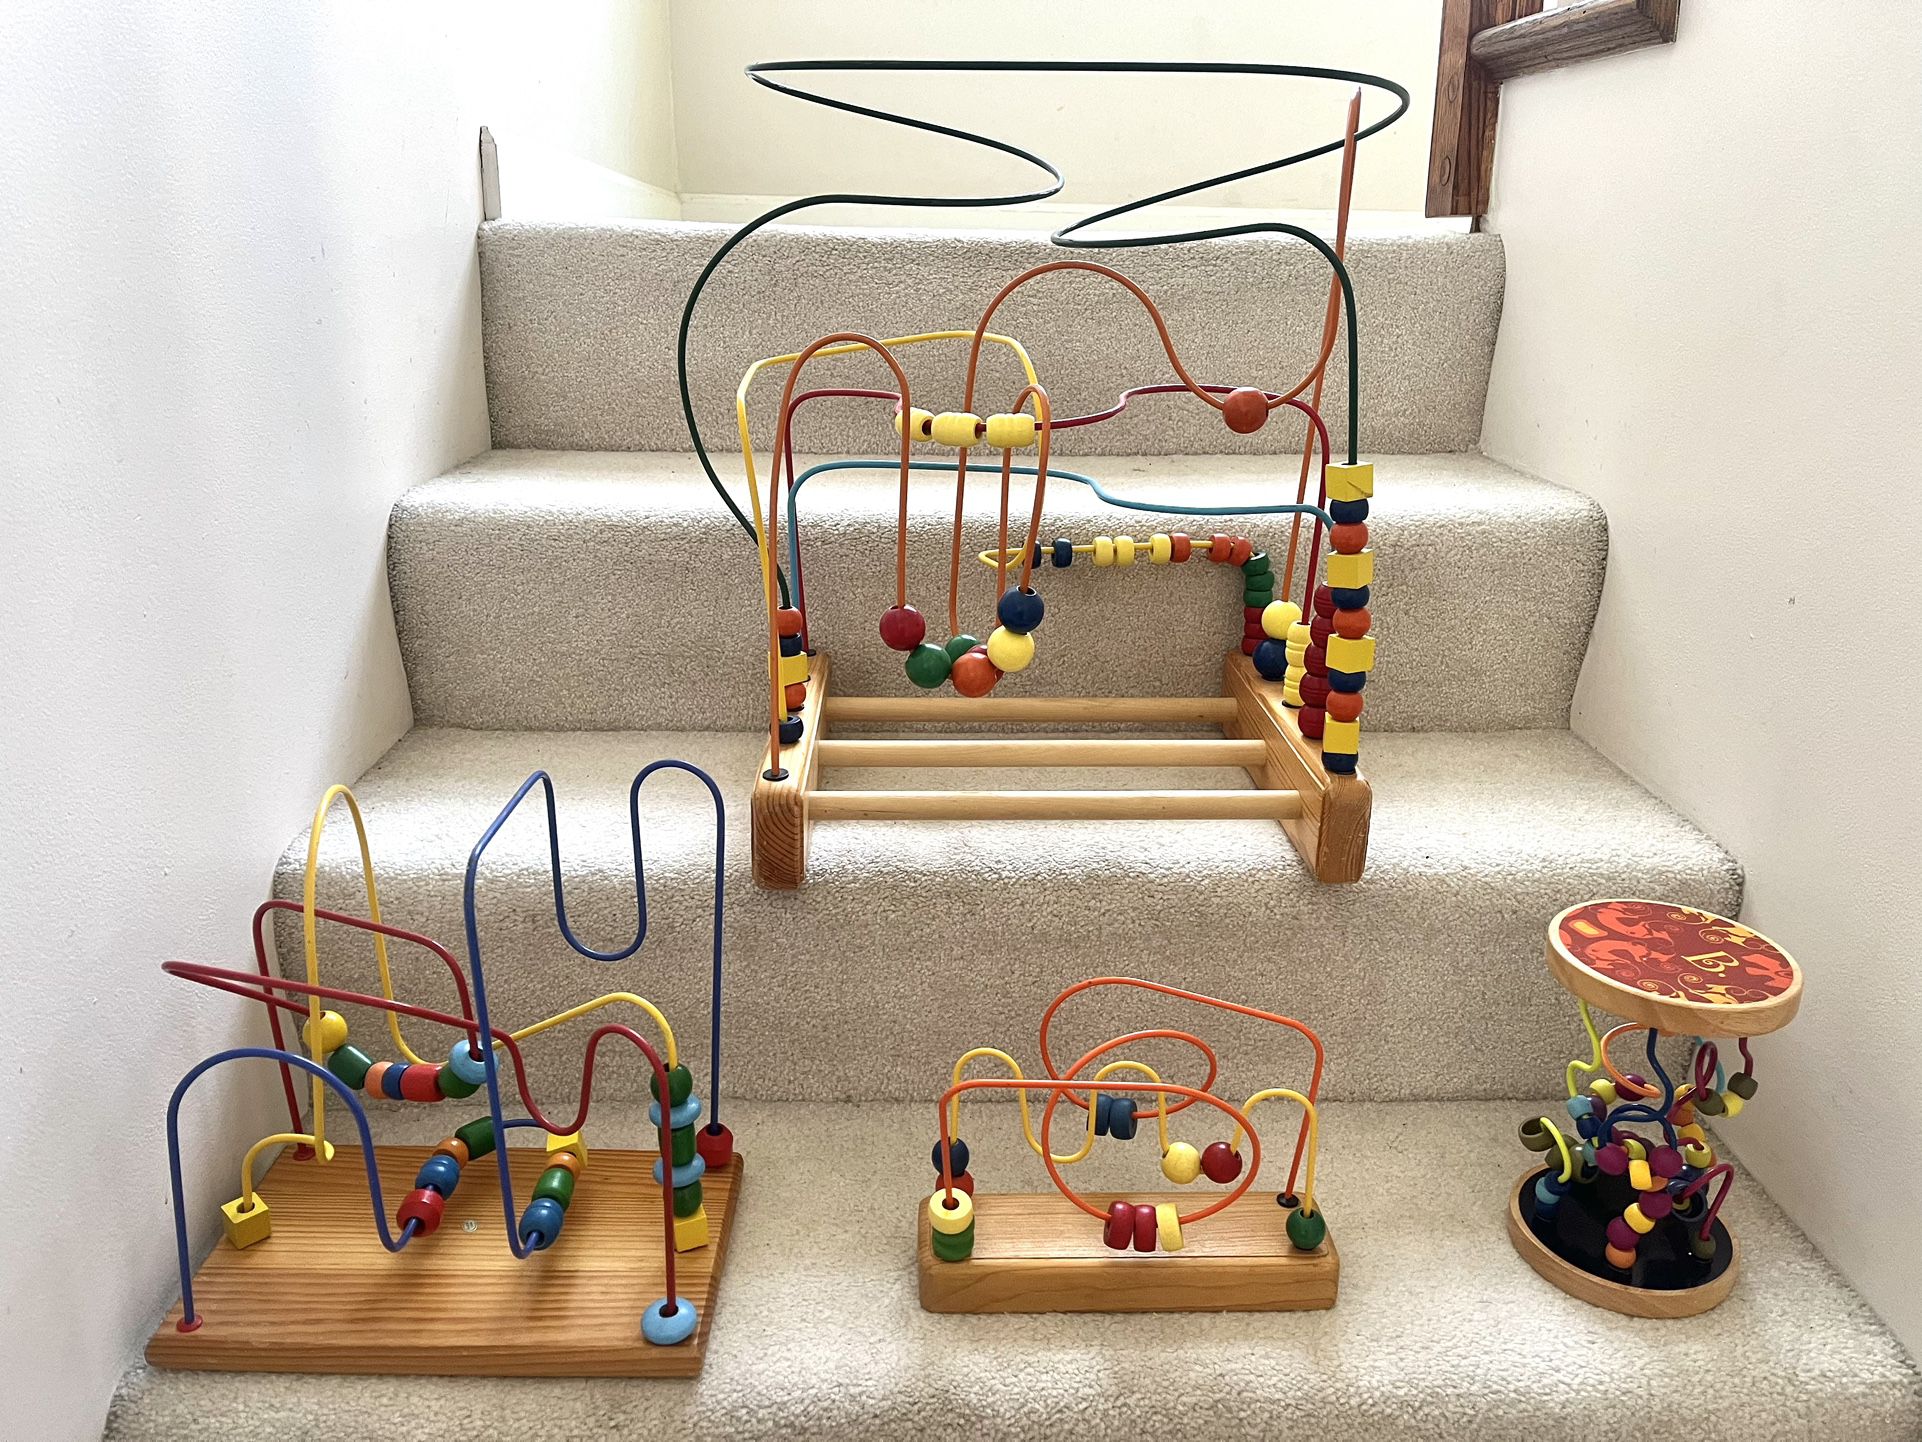 Kids Wooden Maze Bead Toys $6-$15 Each Or all $35